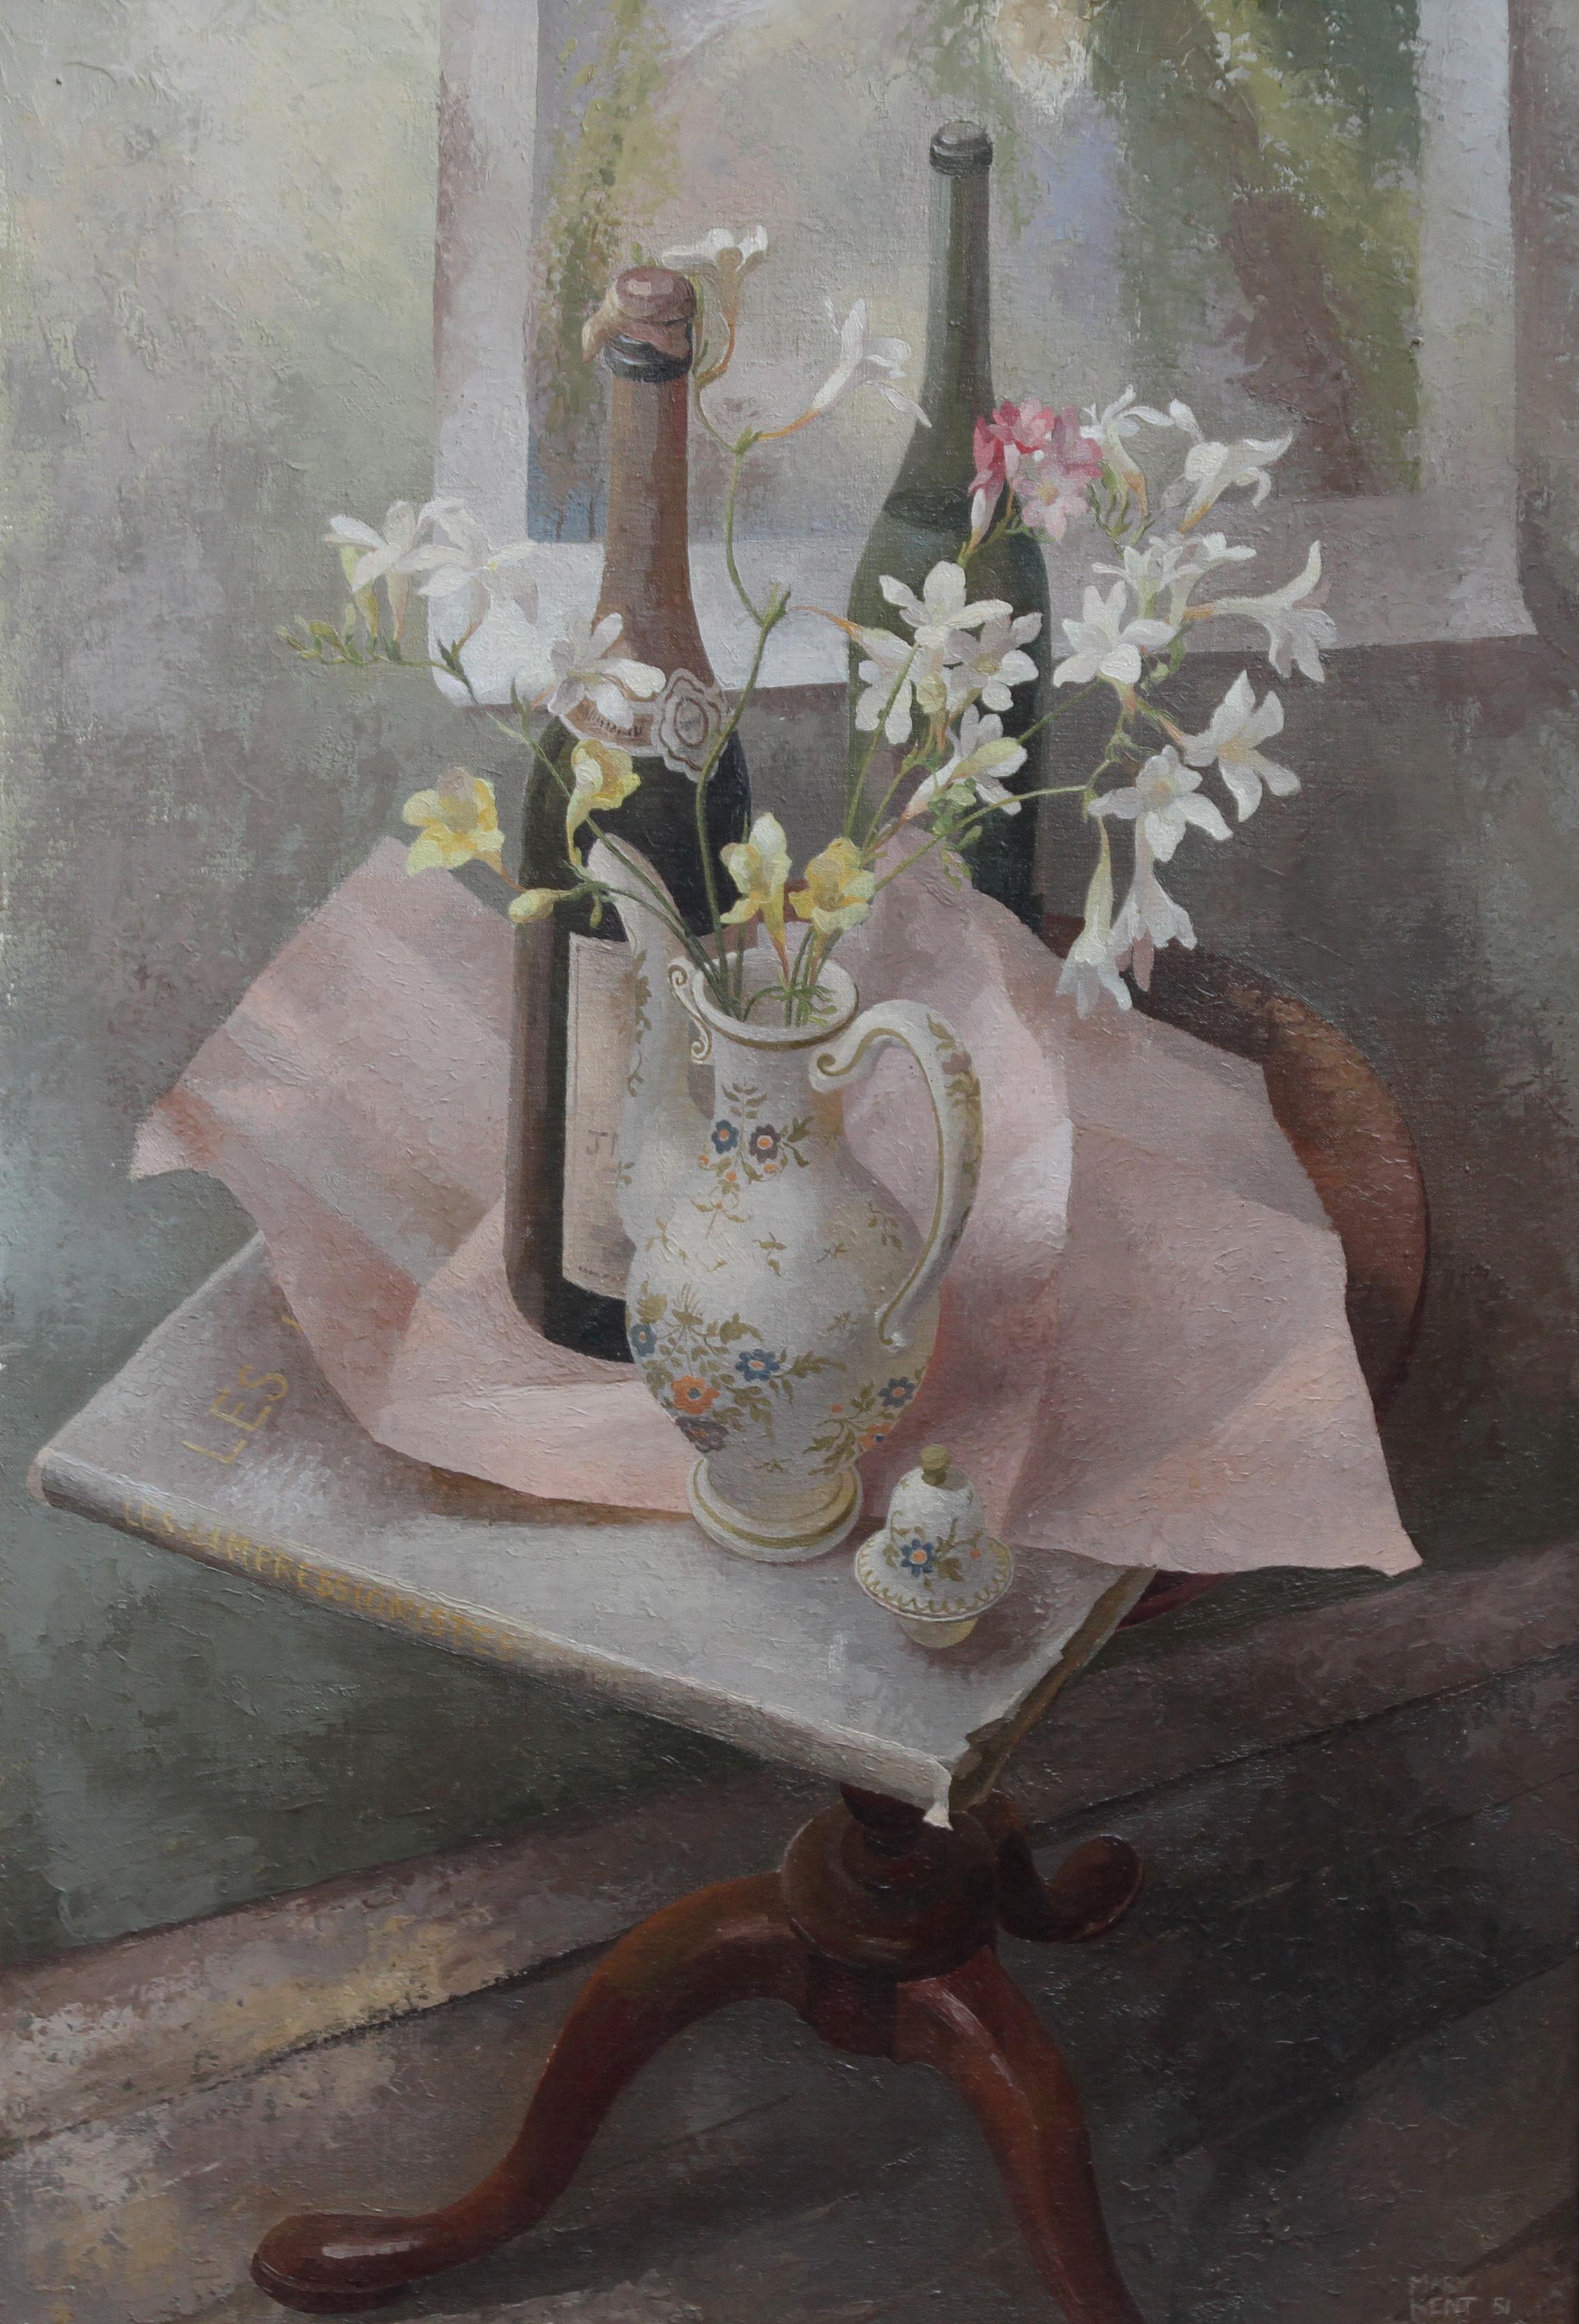 French Coffee Pot - British exh art 1960s floral still life oil painting flowers For Sale 2